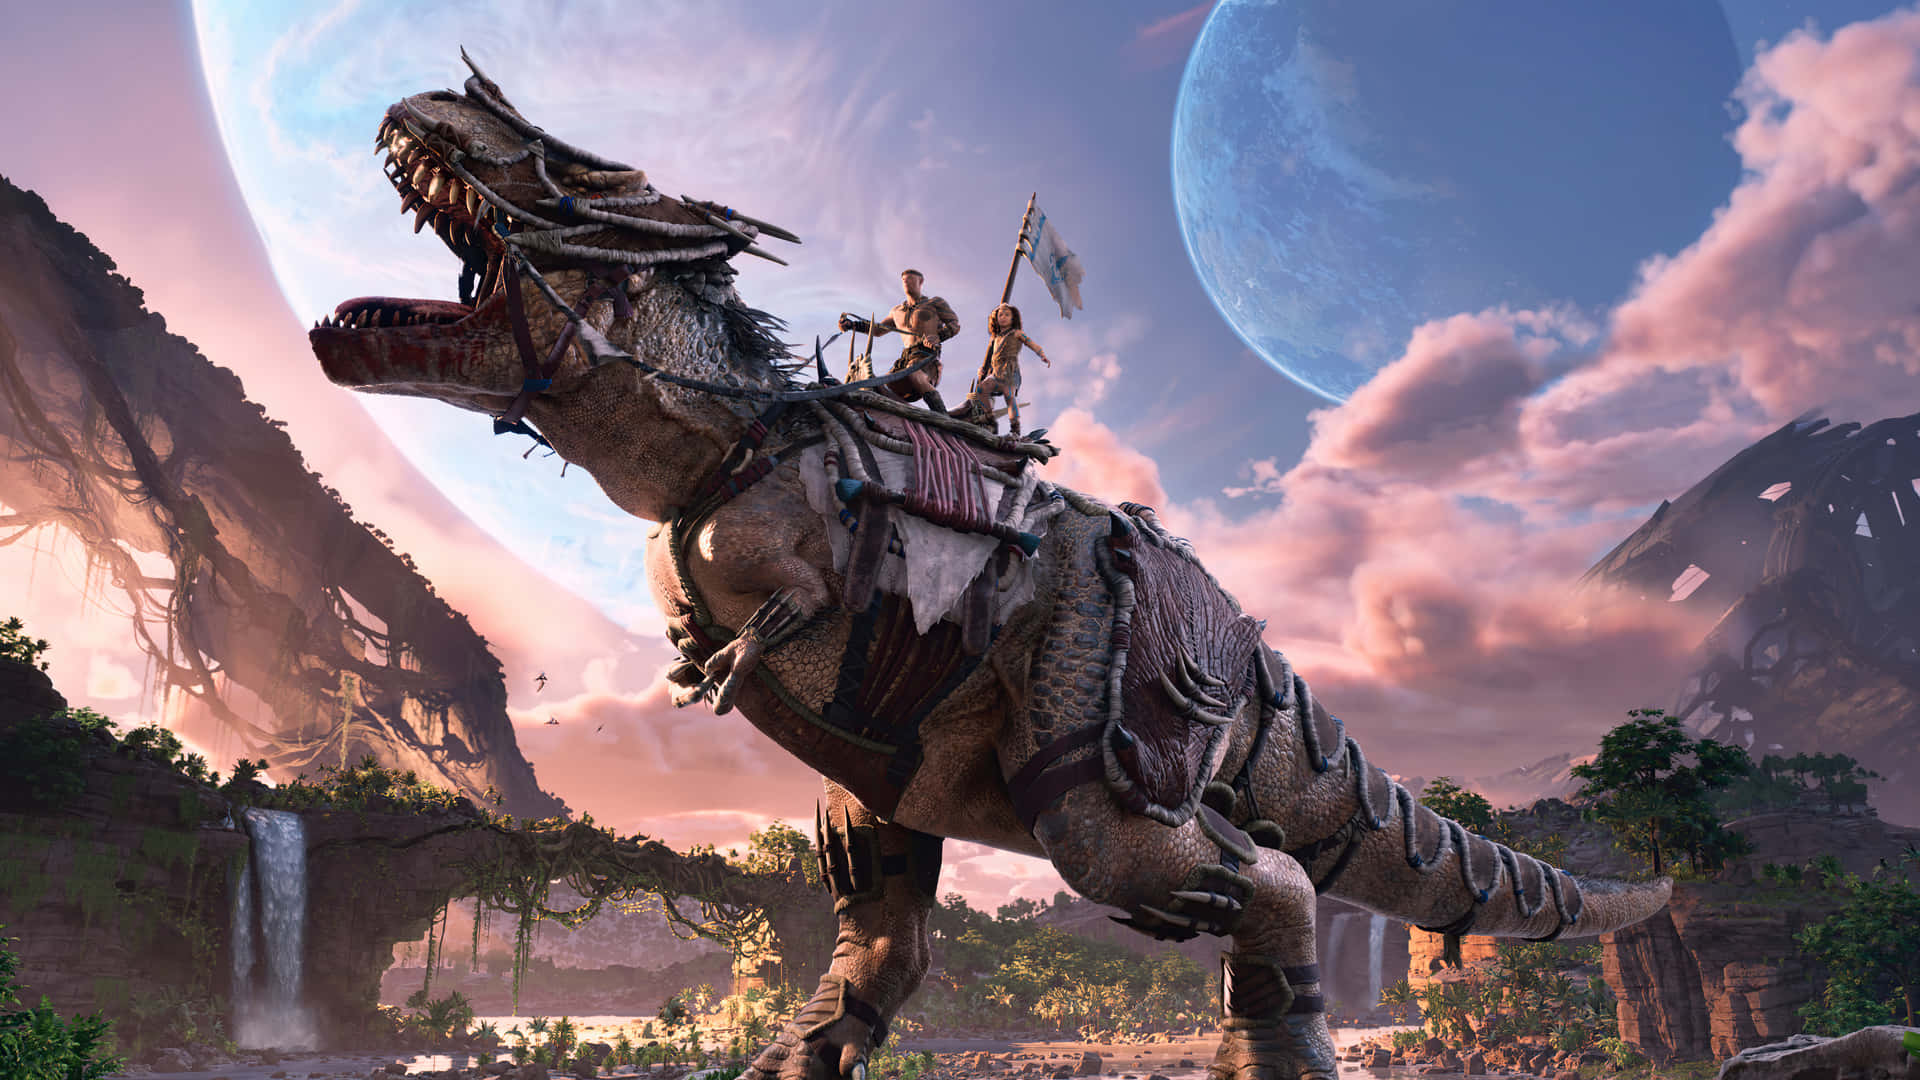 A Dinosaur Is Riding A Horse In A Fantasy World Background